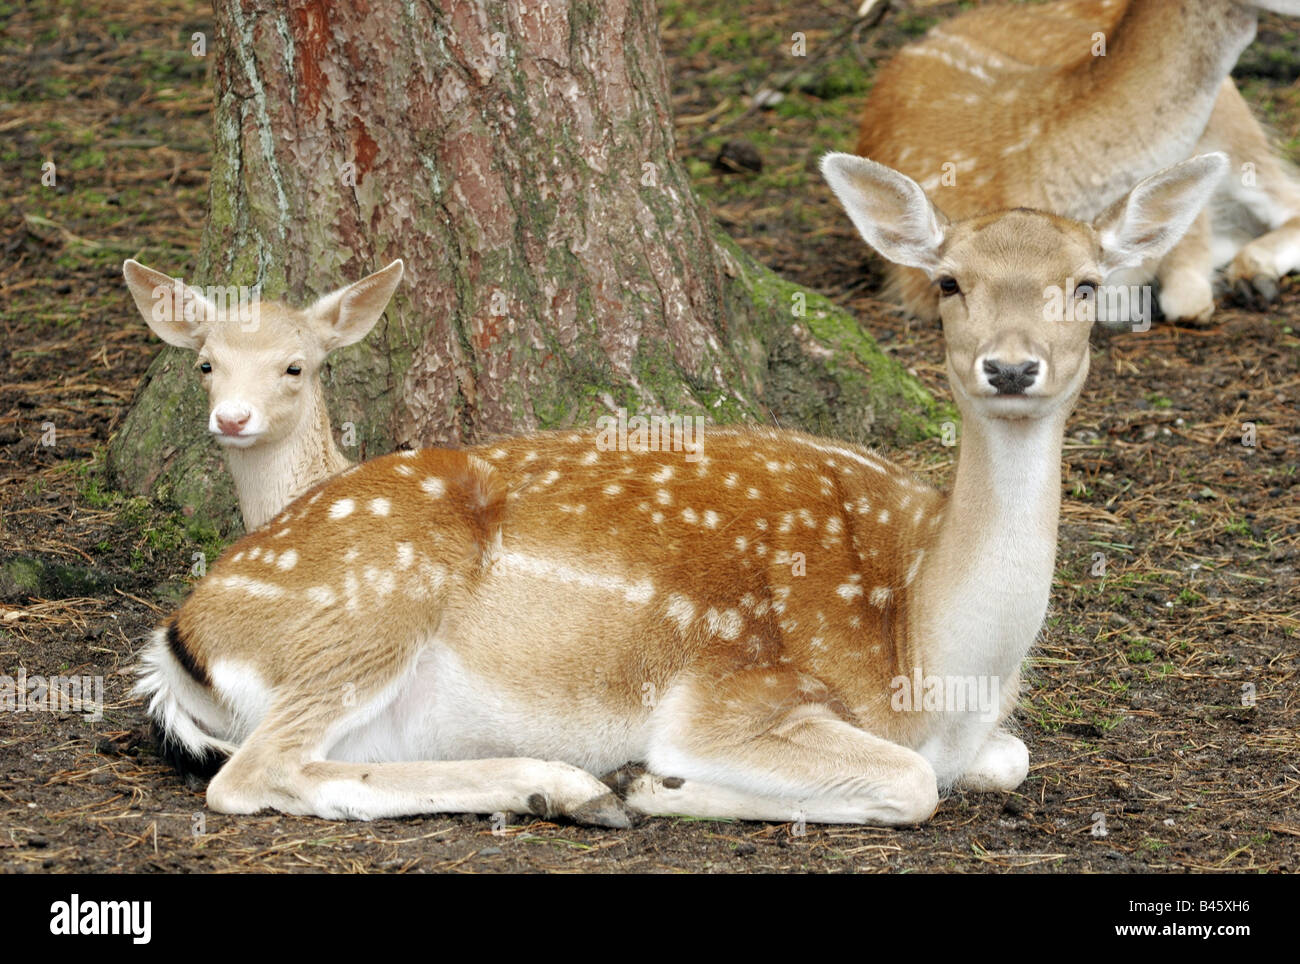 zoology / animals, mammal / mammalian, deers, Fallow Deer, (Cervus dama), deers, sitting, standing on meadow, distribution: Europe, Asia, Additional-Rights-Clearance-Info-Not-Available Stock Photo